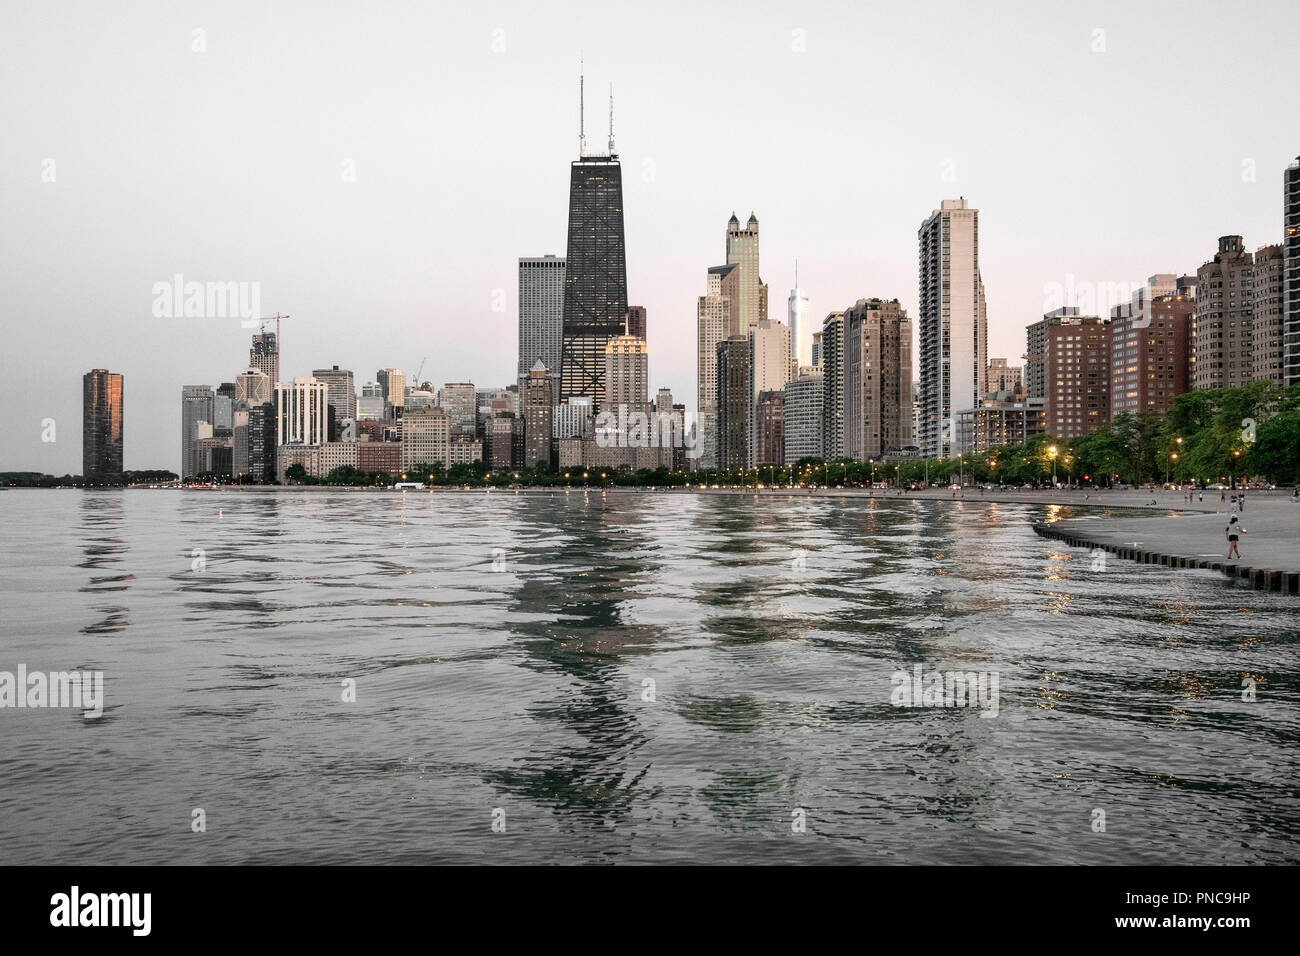 View of the Chicago skyline from North Avenue Beach on Lake Michigan, Chicago, Illinois. Stock Photo